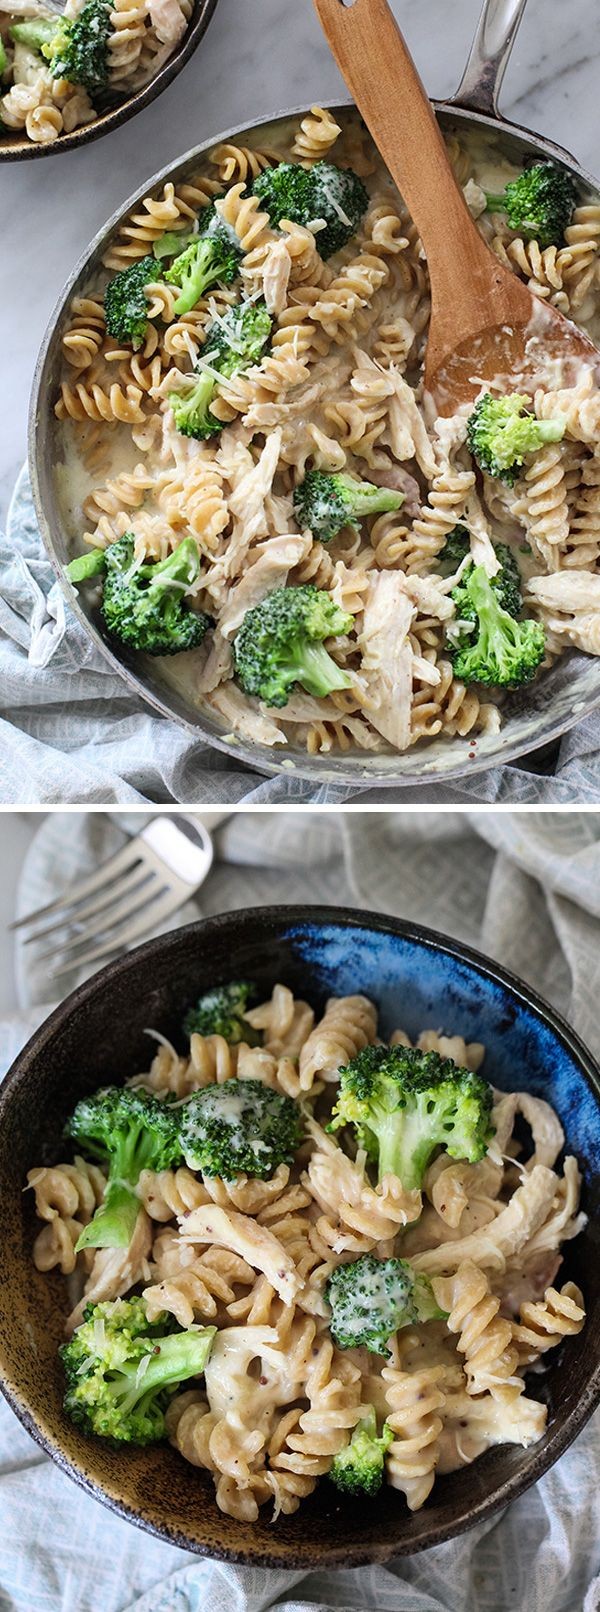 I sneak in healthy when I can. Whole wheat pasta a...